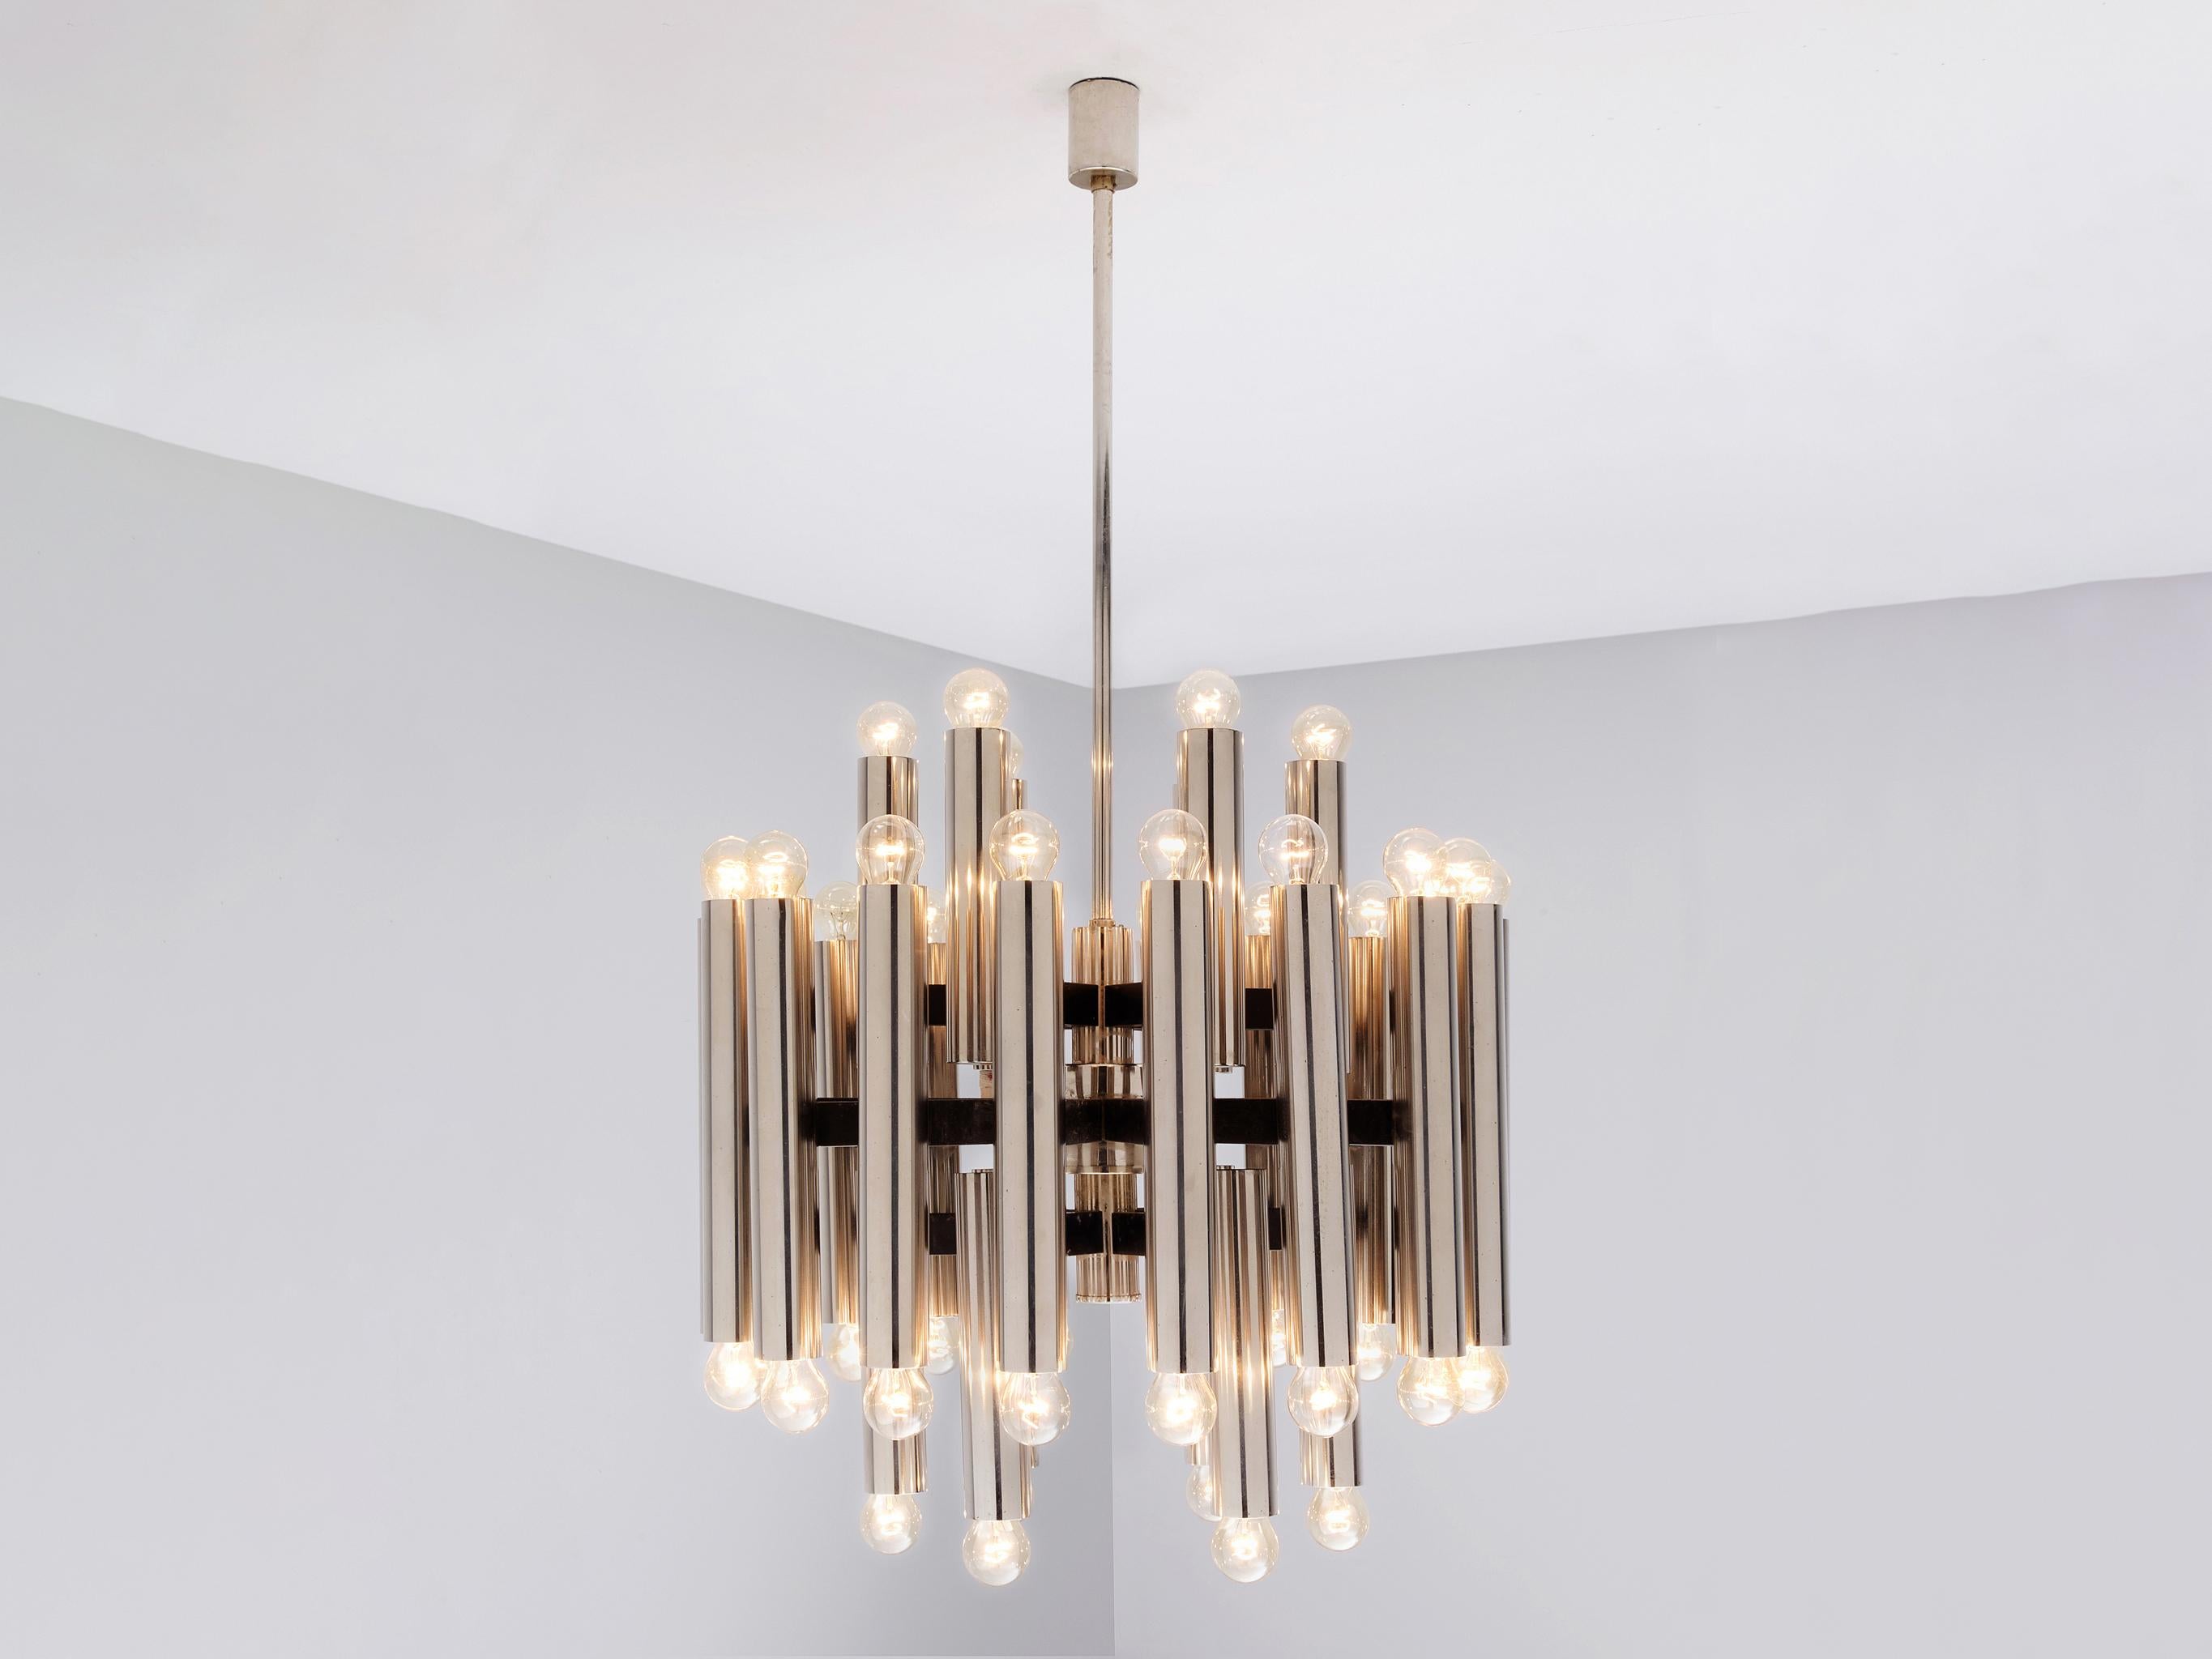 Chandelier, chrome-plated steel, coated steel, Germany, 1960s.

This design resembles the design aesthetics of Italian designer Gaetano Sciolari, known for his abundant use of metals and clean, streamlined shapes. Comprising cylindrical tubes